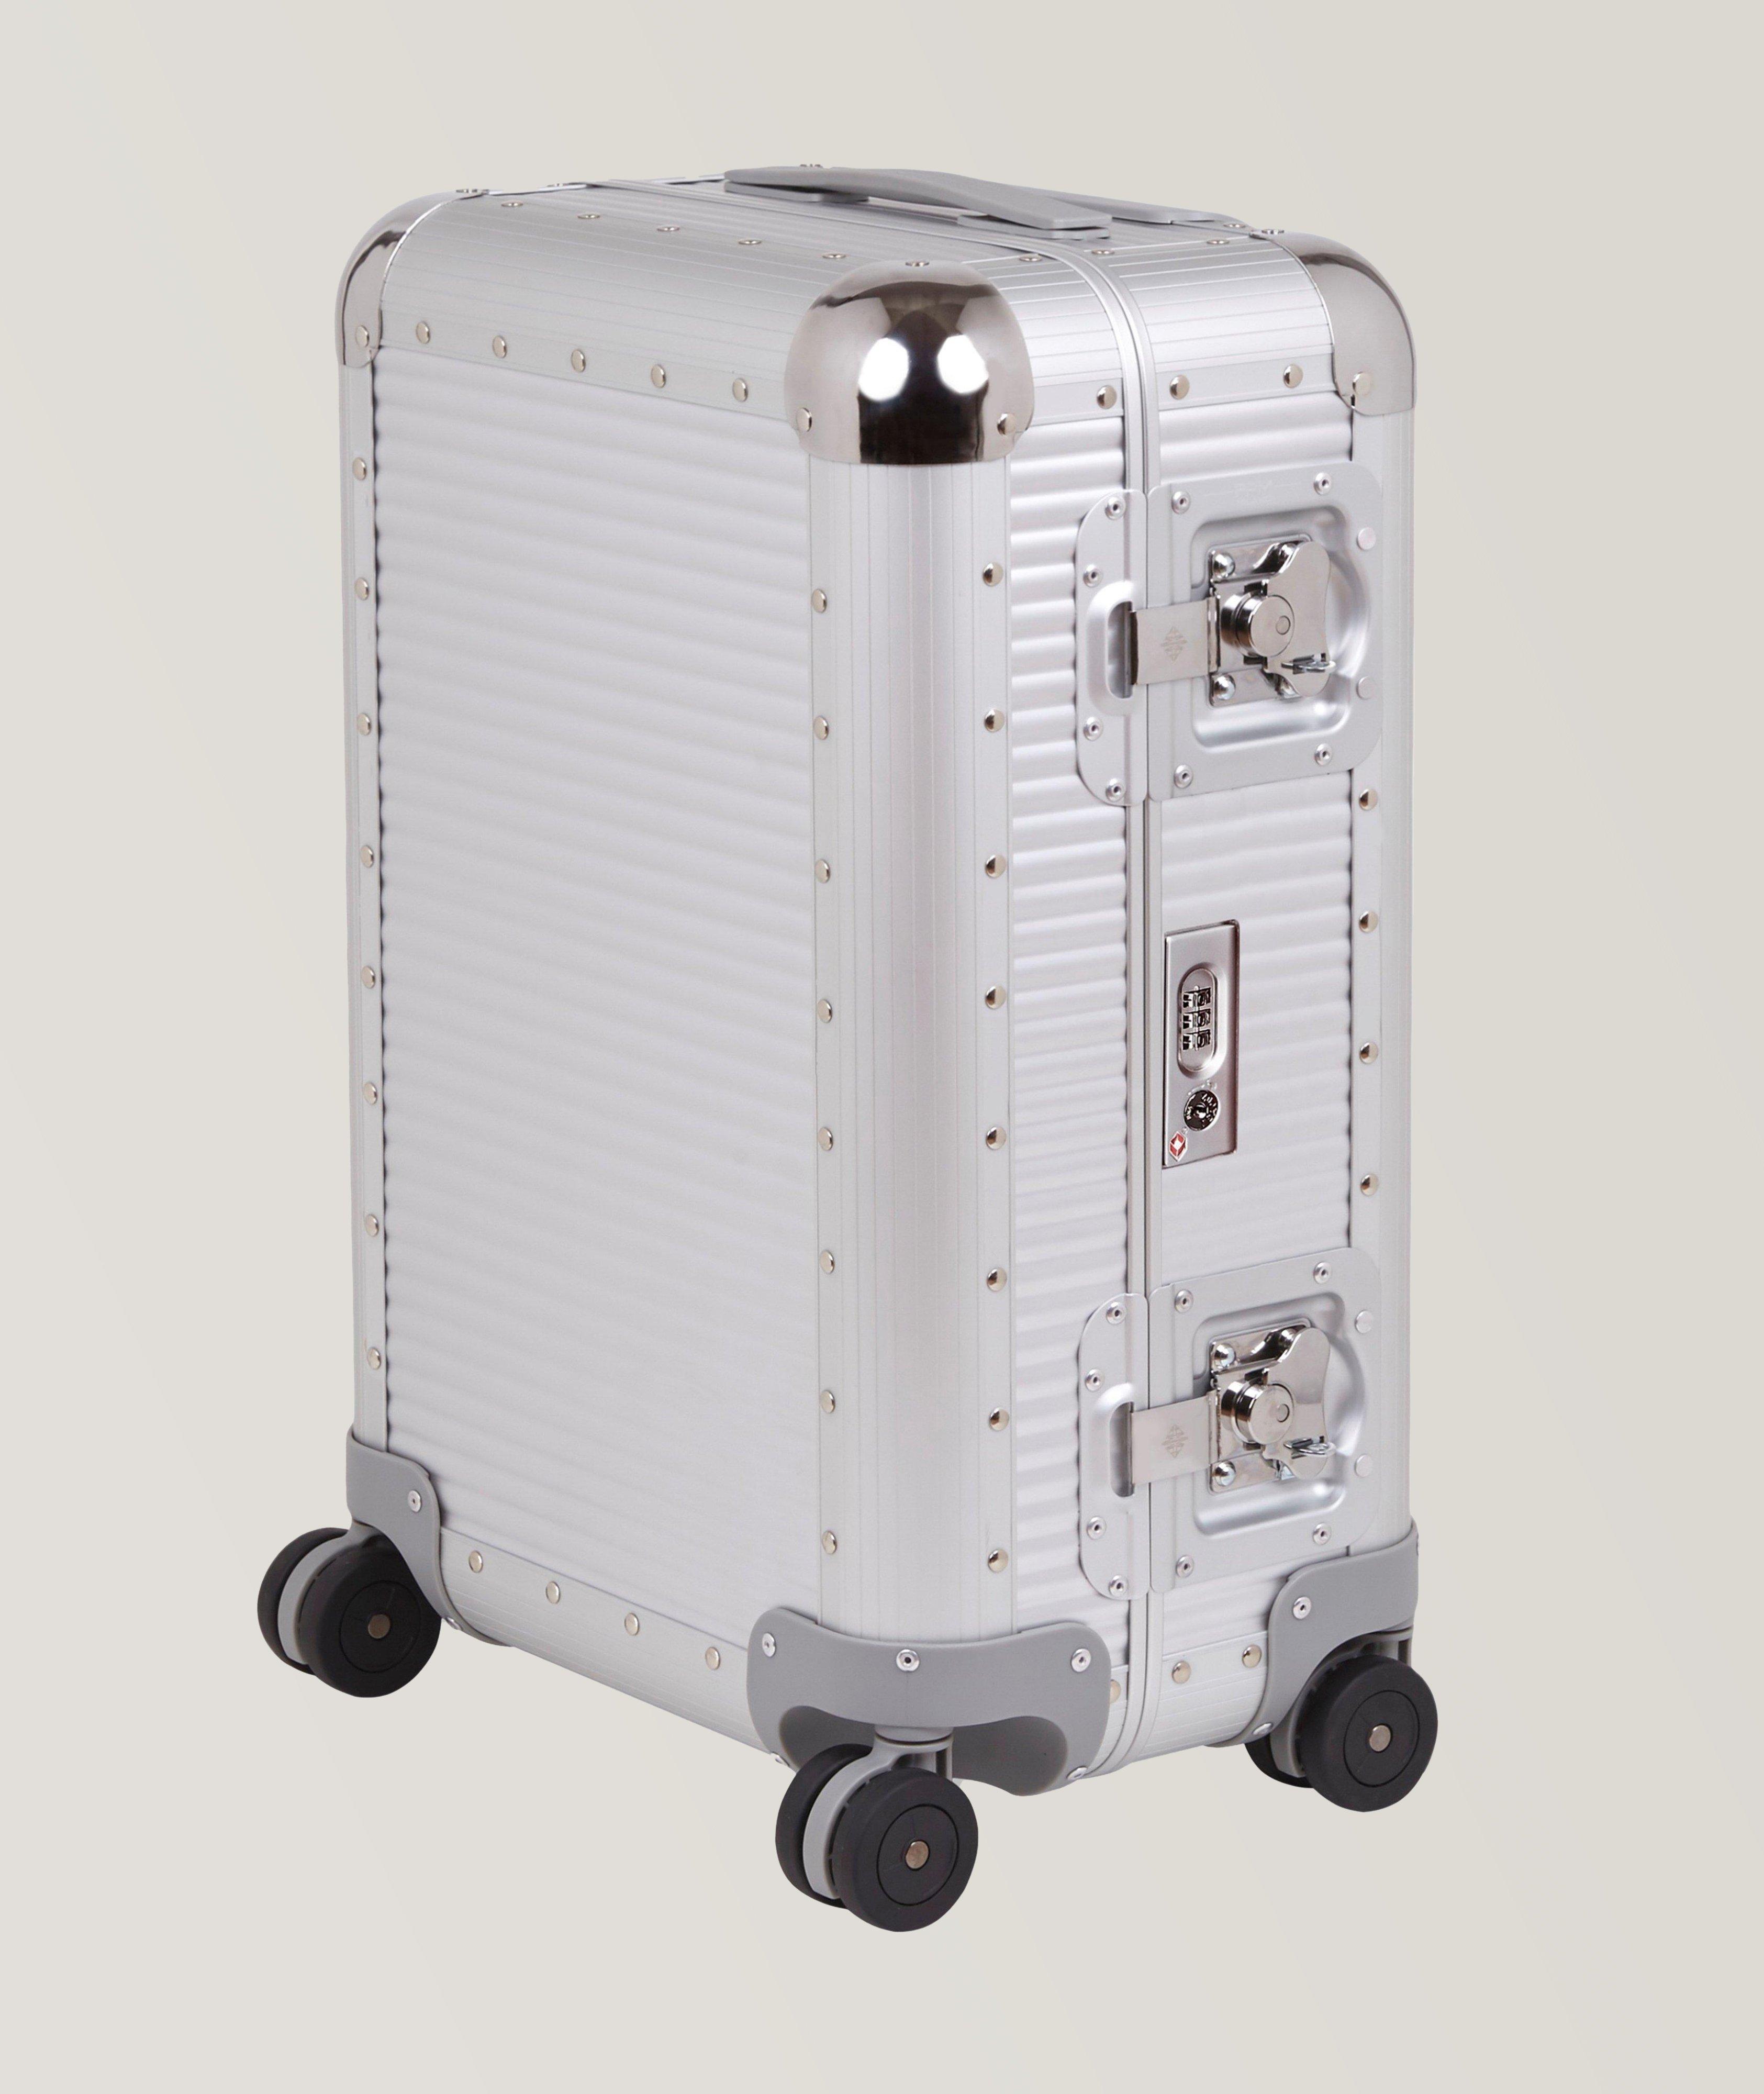 Bank S Spinner 53cm Aluminium Carry-on Luggage image 1